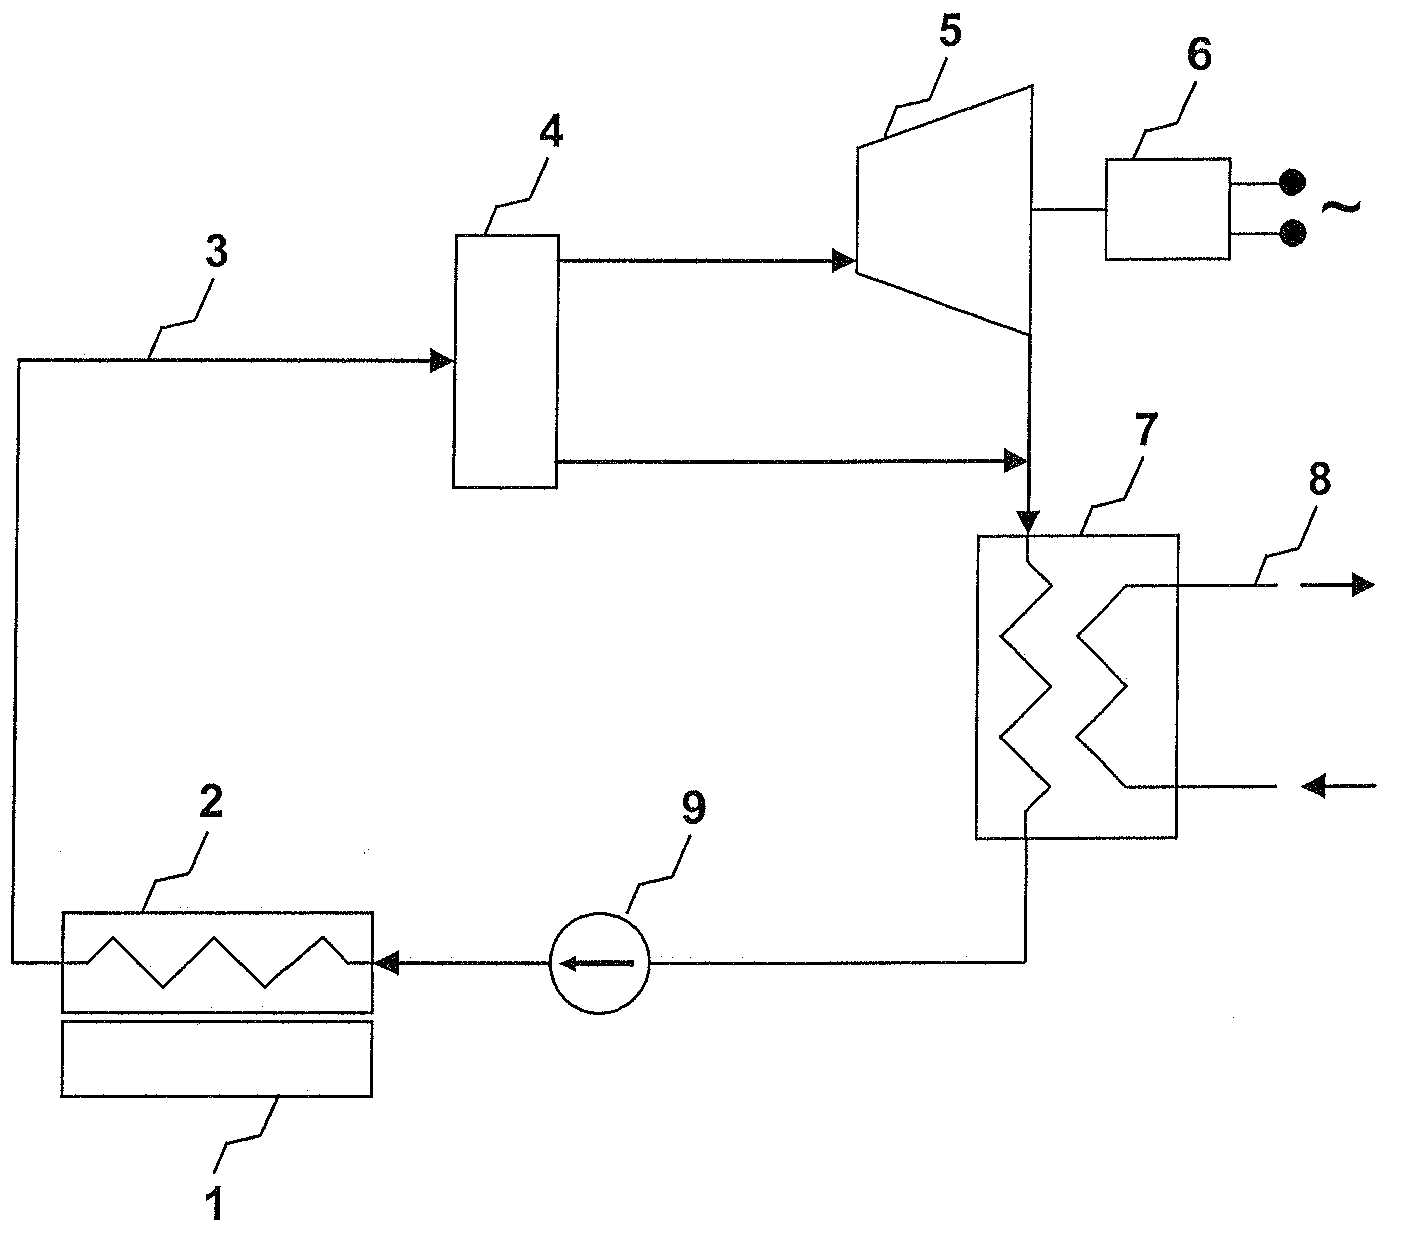 Cooling apparatus for a computer system